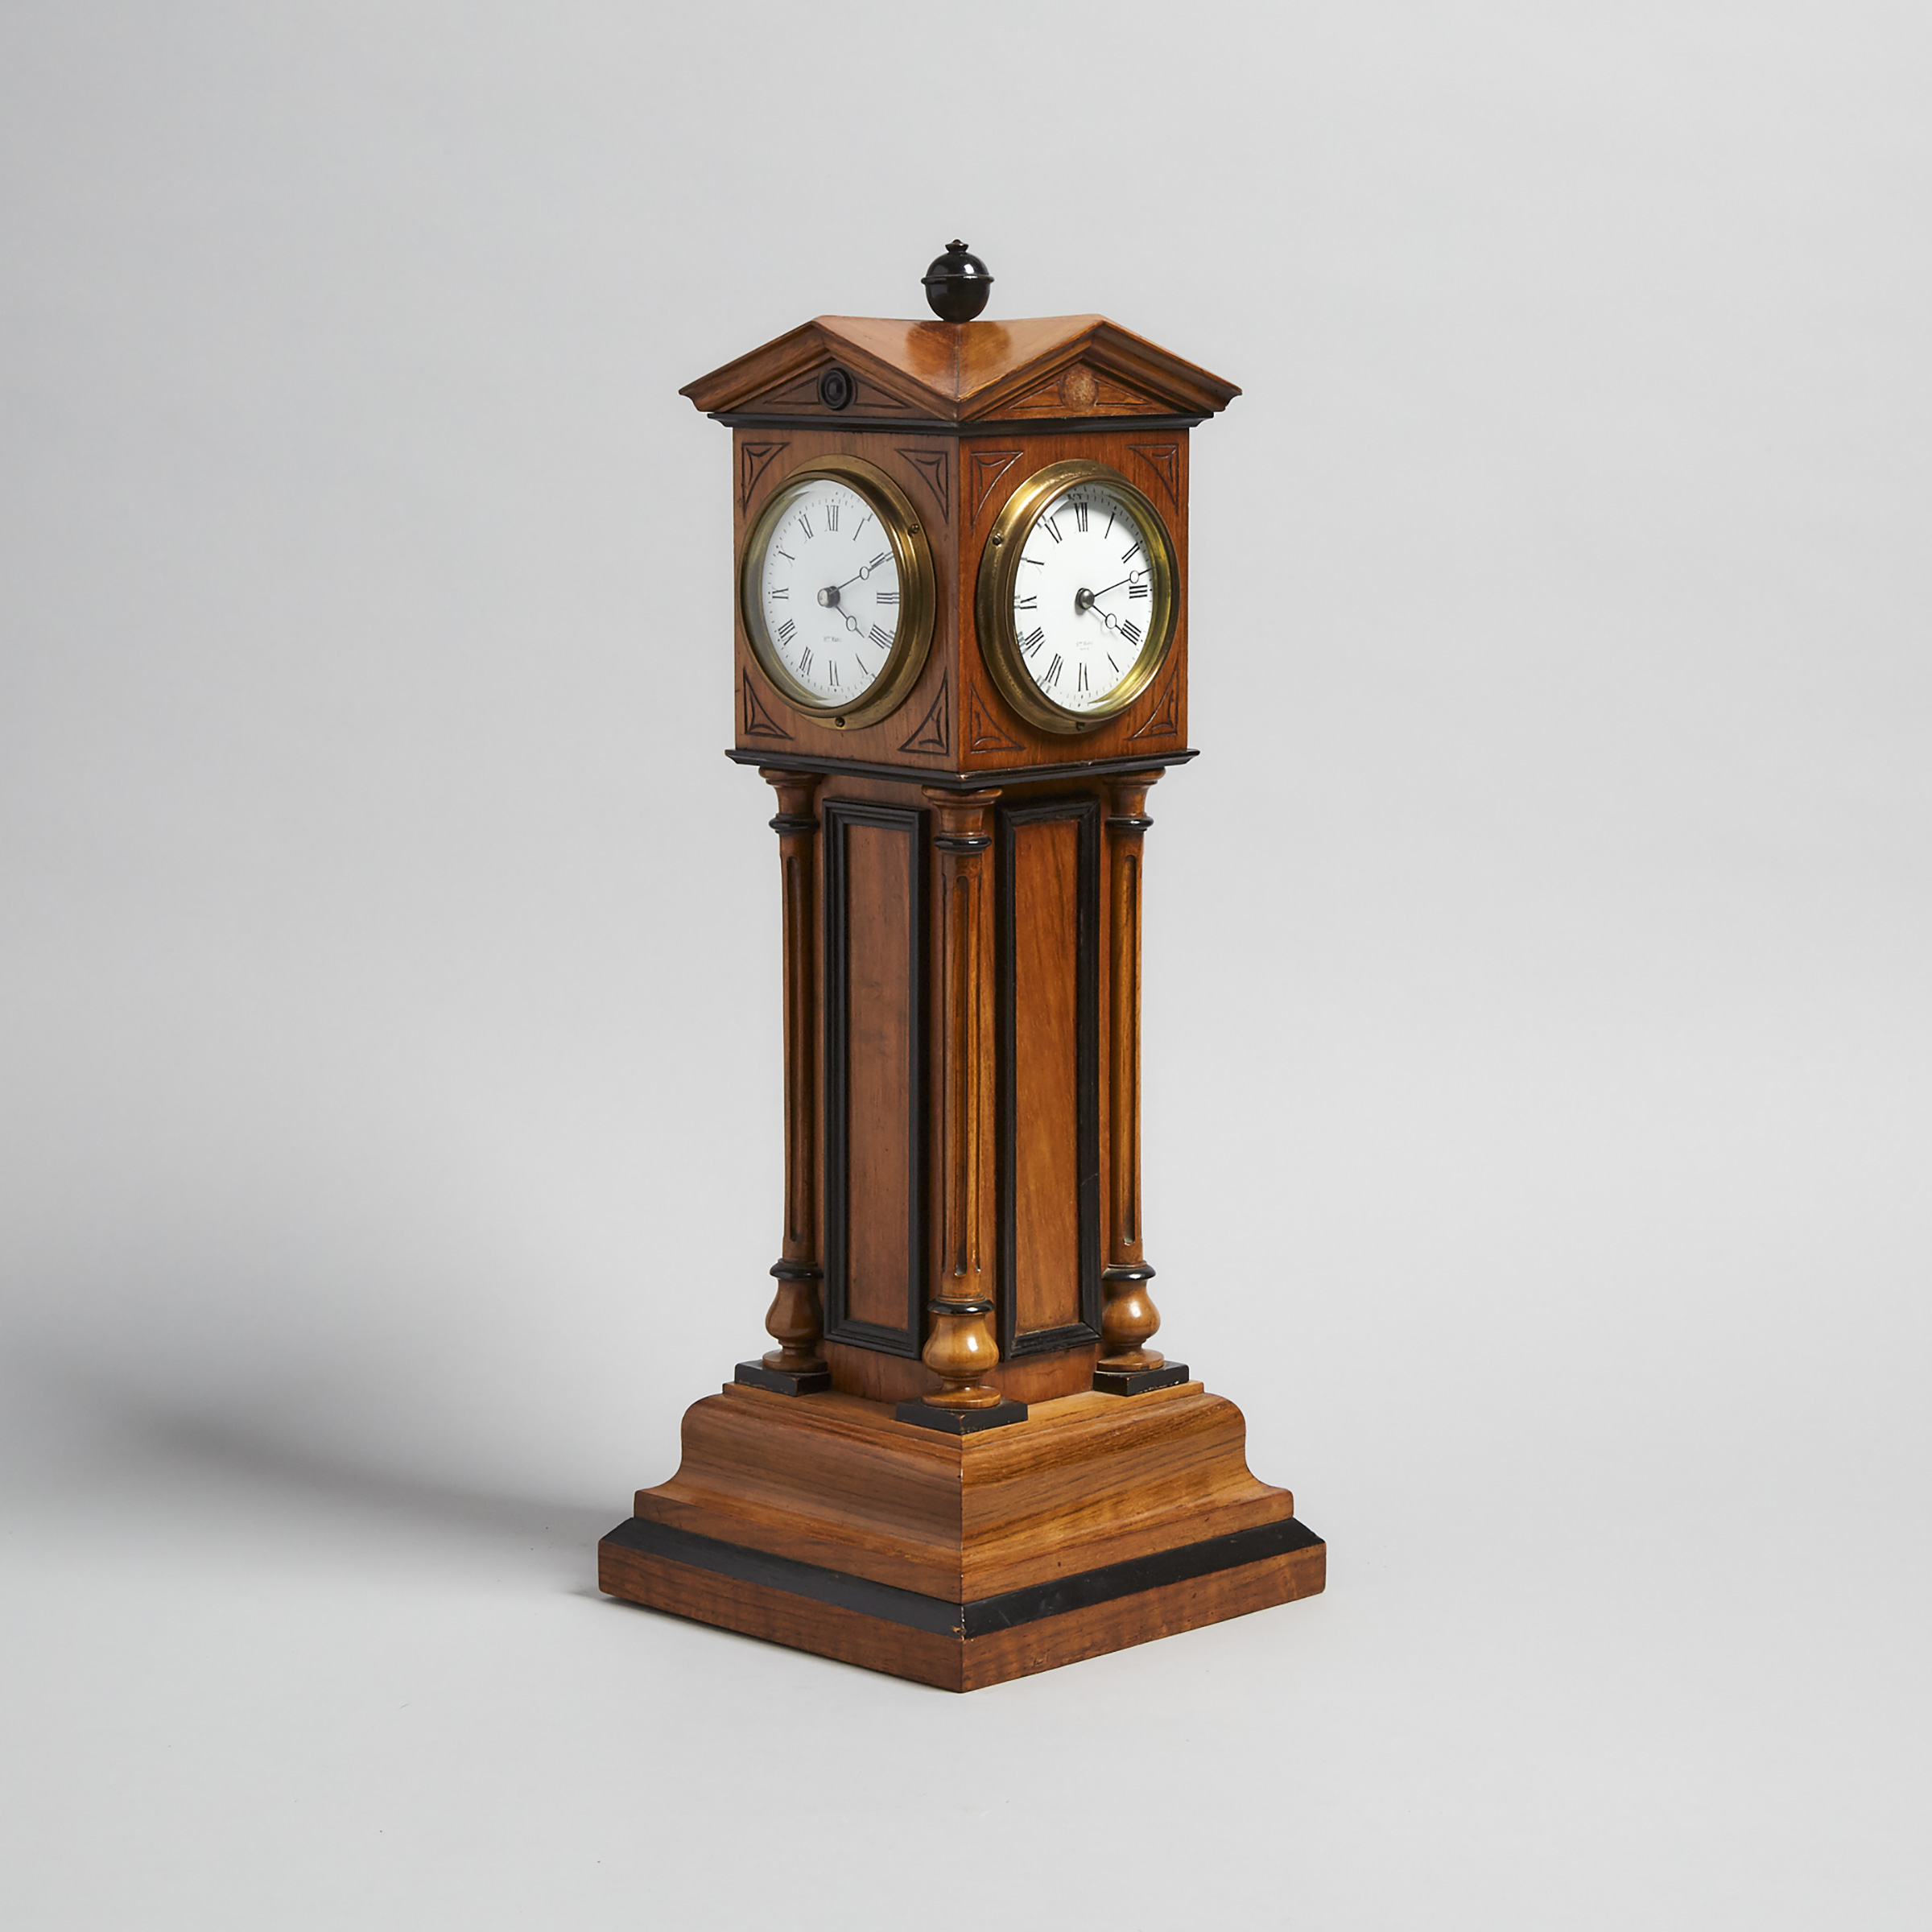 French Model of a Four Dial Tower Clock by Blumberg & Co. for Henry Marc, Paris, early 20th century